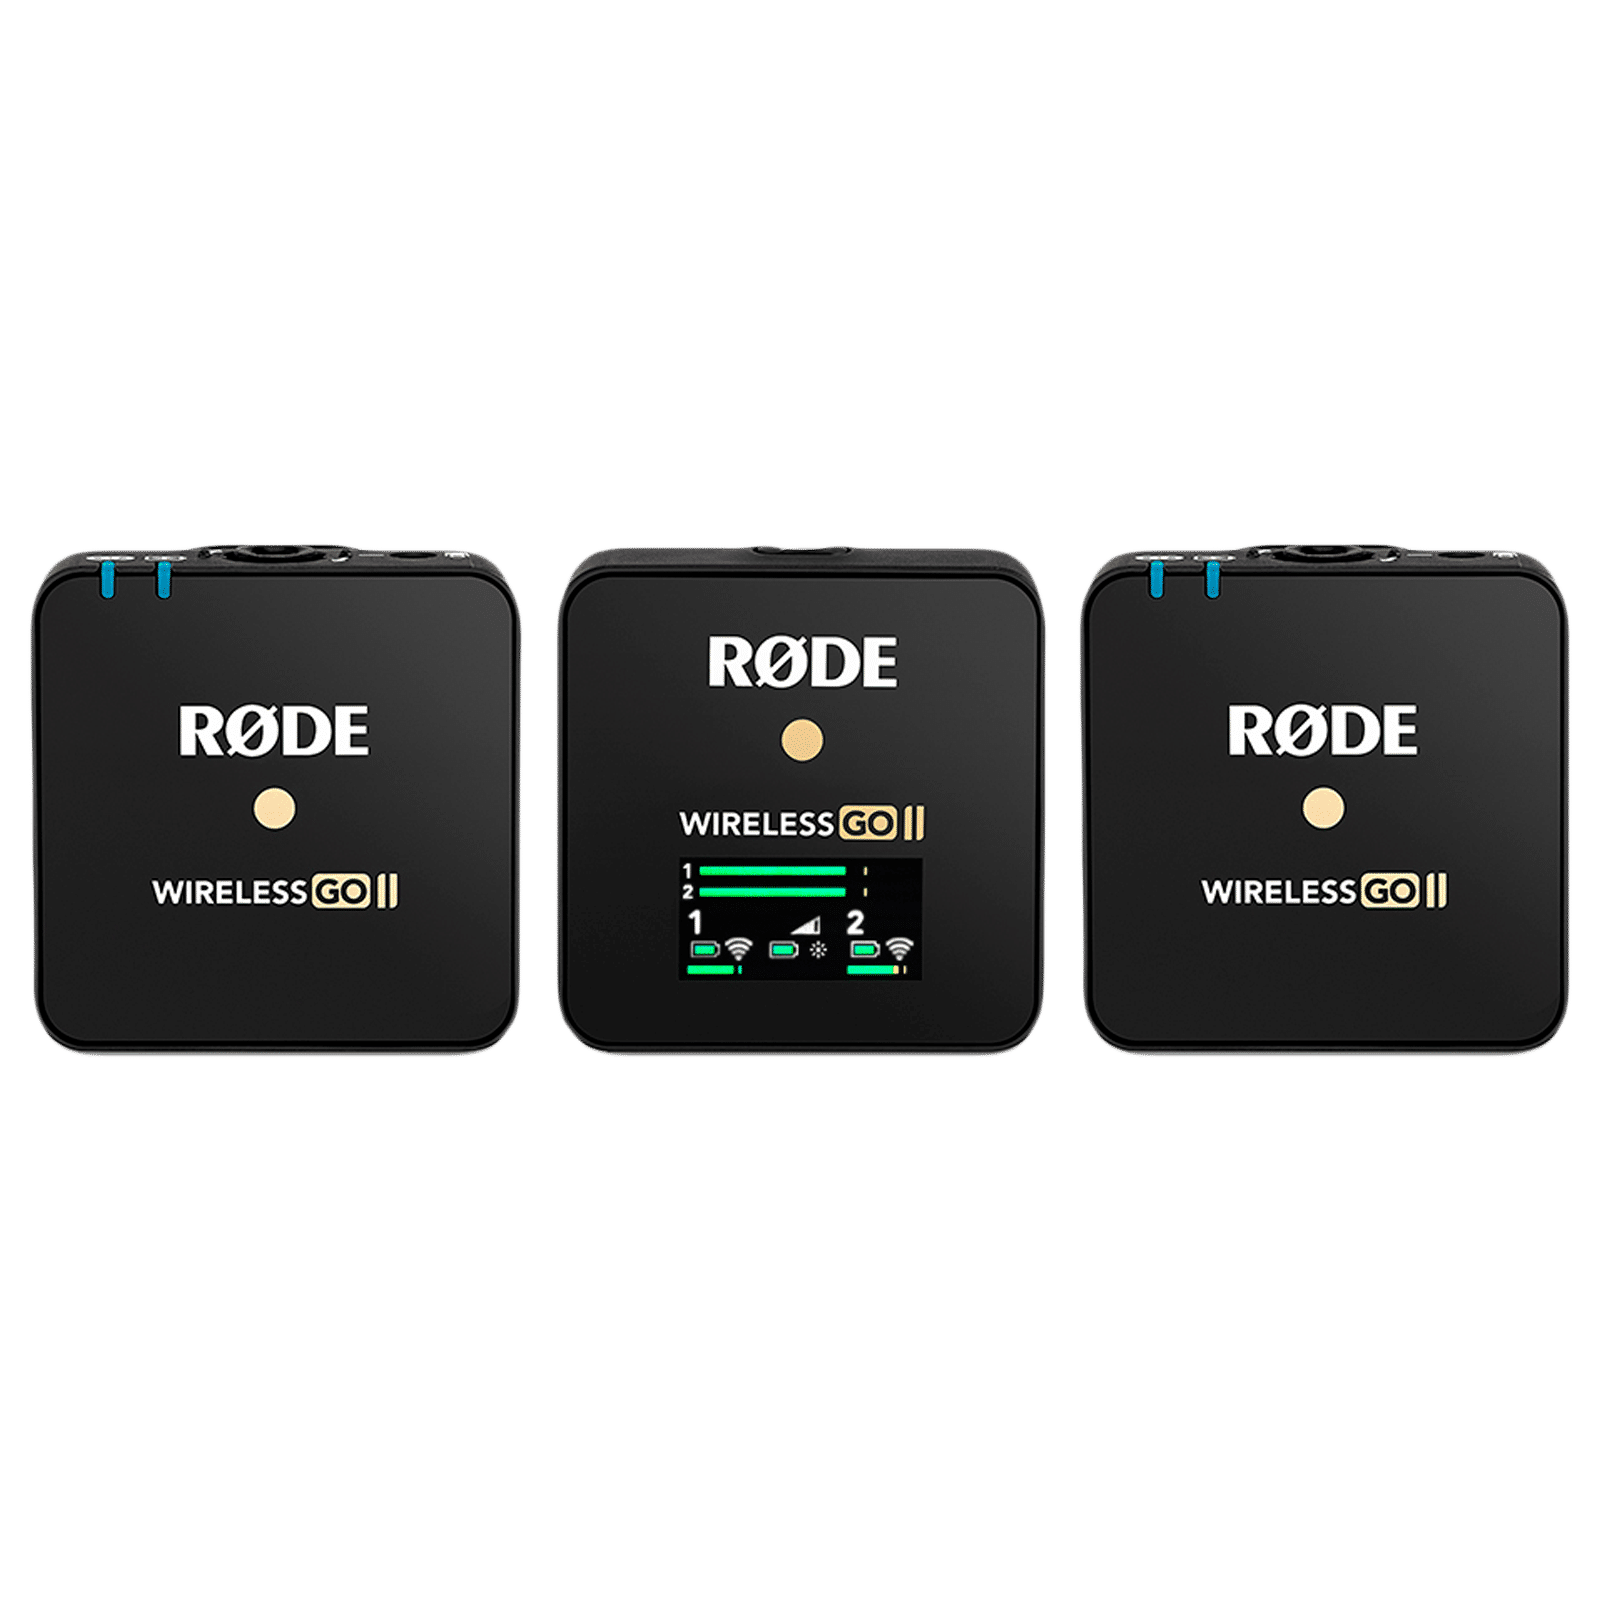 Rode Wireless GO White review